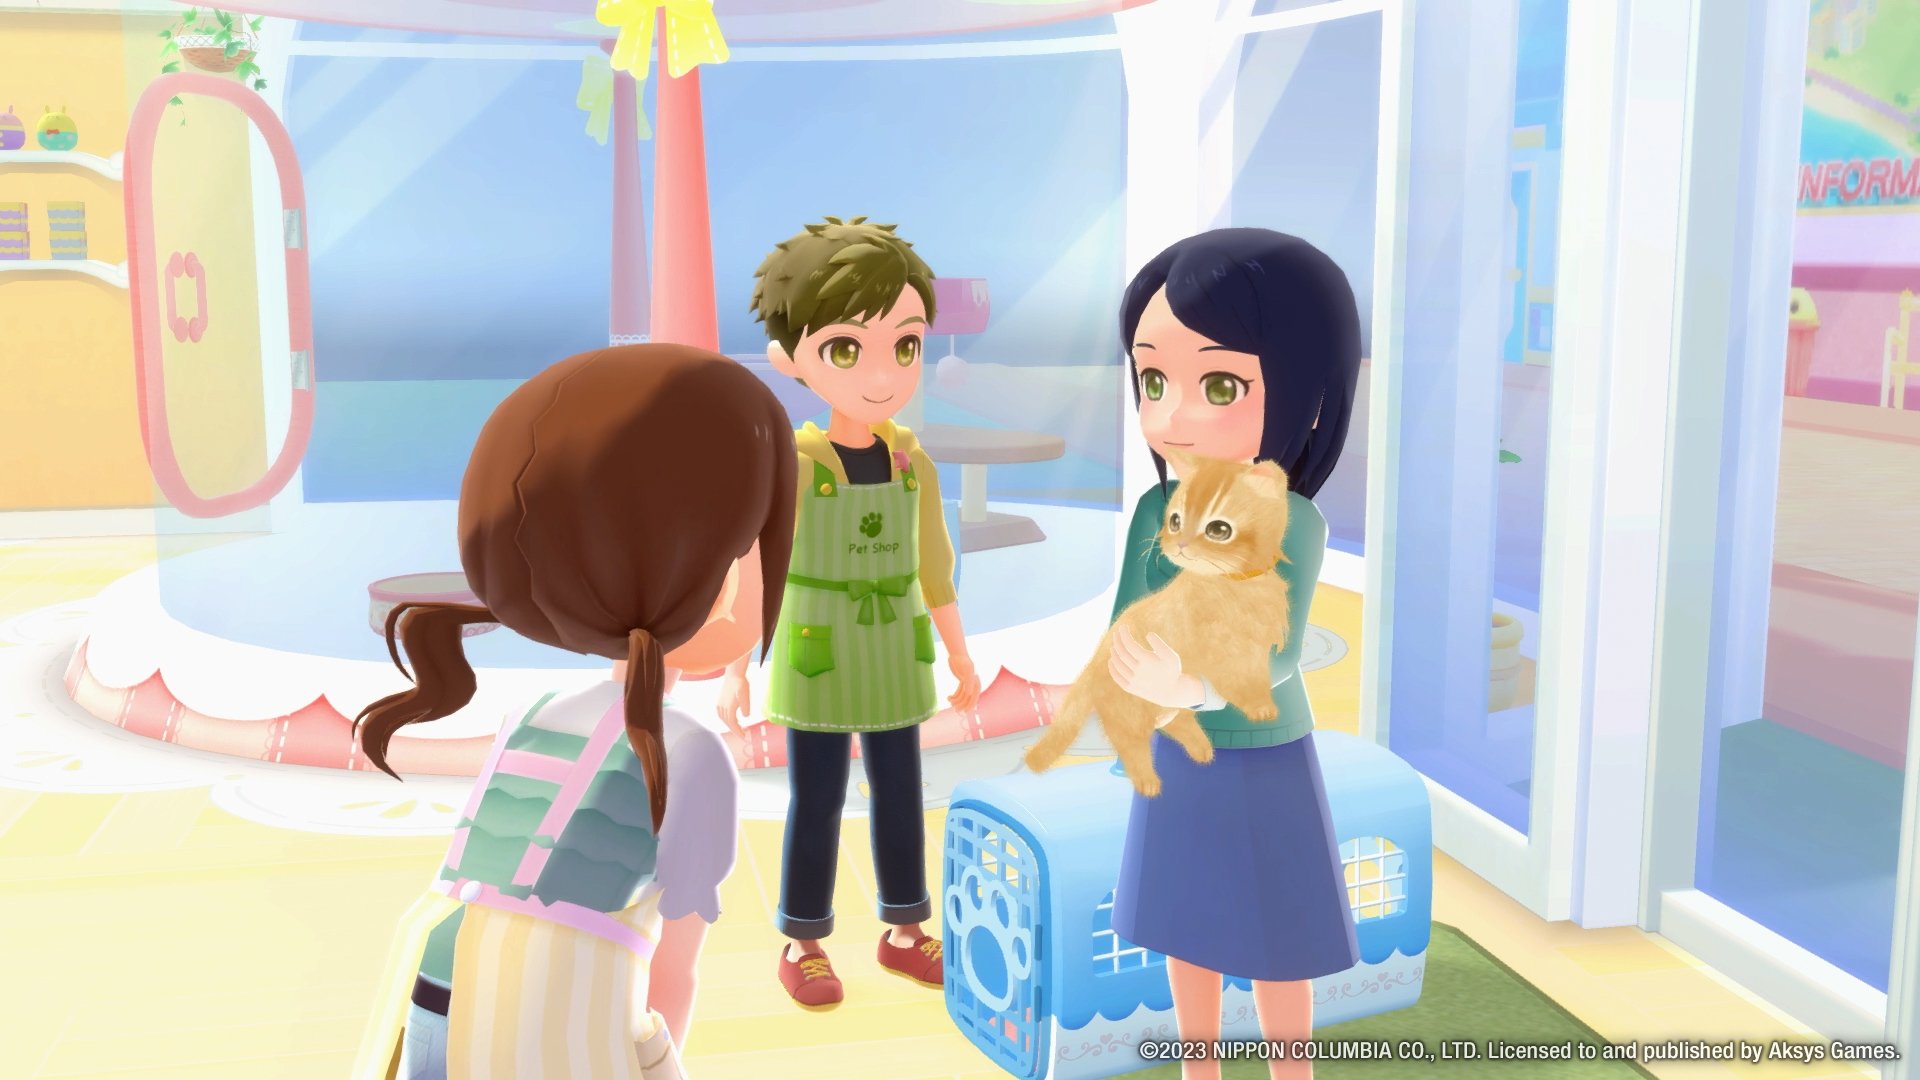 A screenshot from Pups & Purrs Pet Shop. Three people are standing in a pastel pet shop. Two are wearing shop smocks; one is a girl with brown pigtails and the other is a boy with short sandy hair. The third person, a girl holding an orange cat, has dark hair in a long bob.